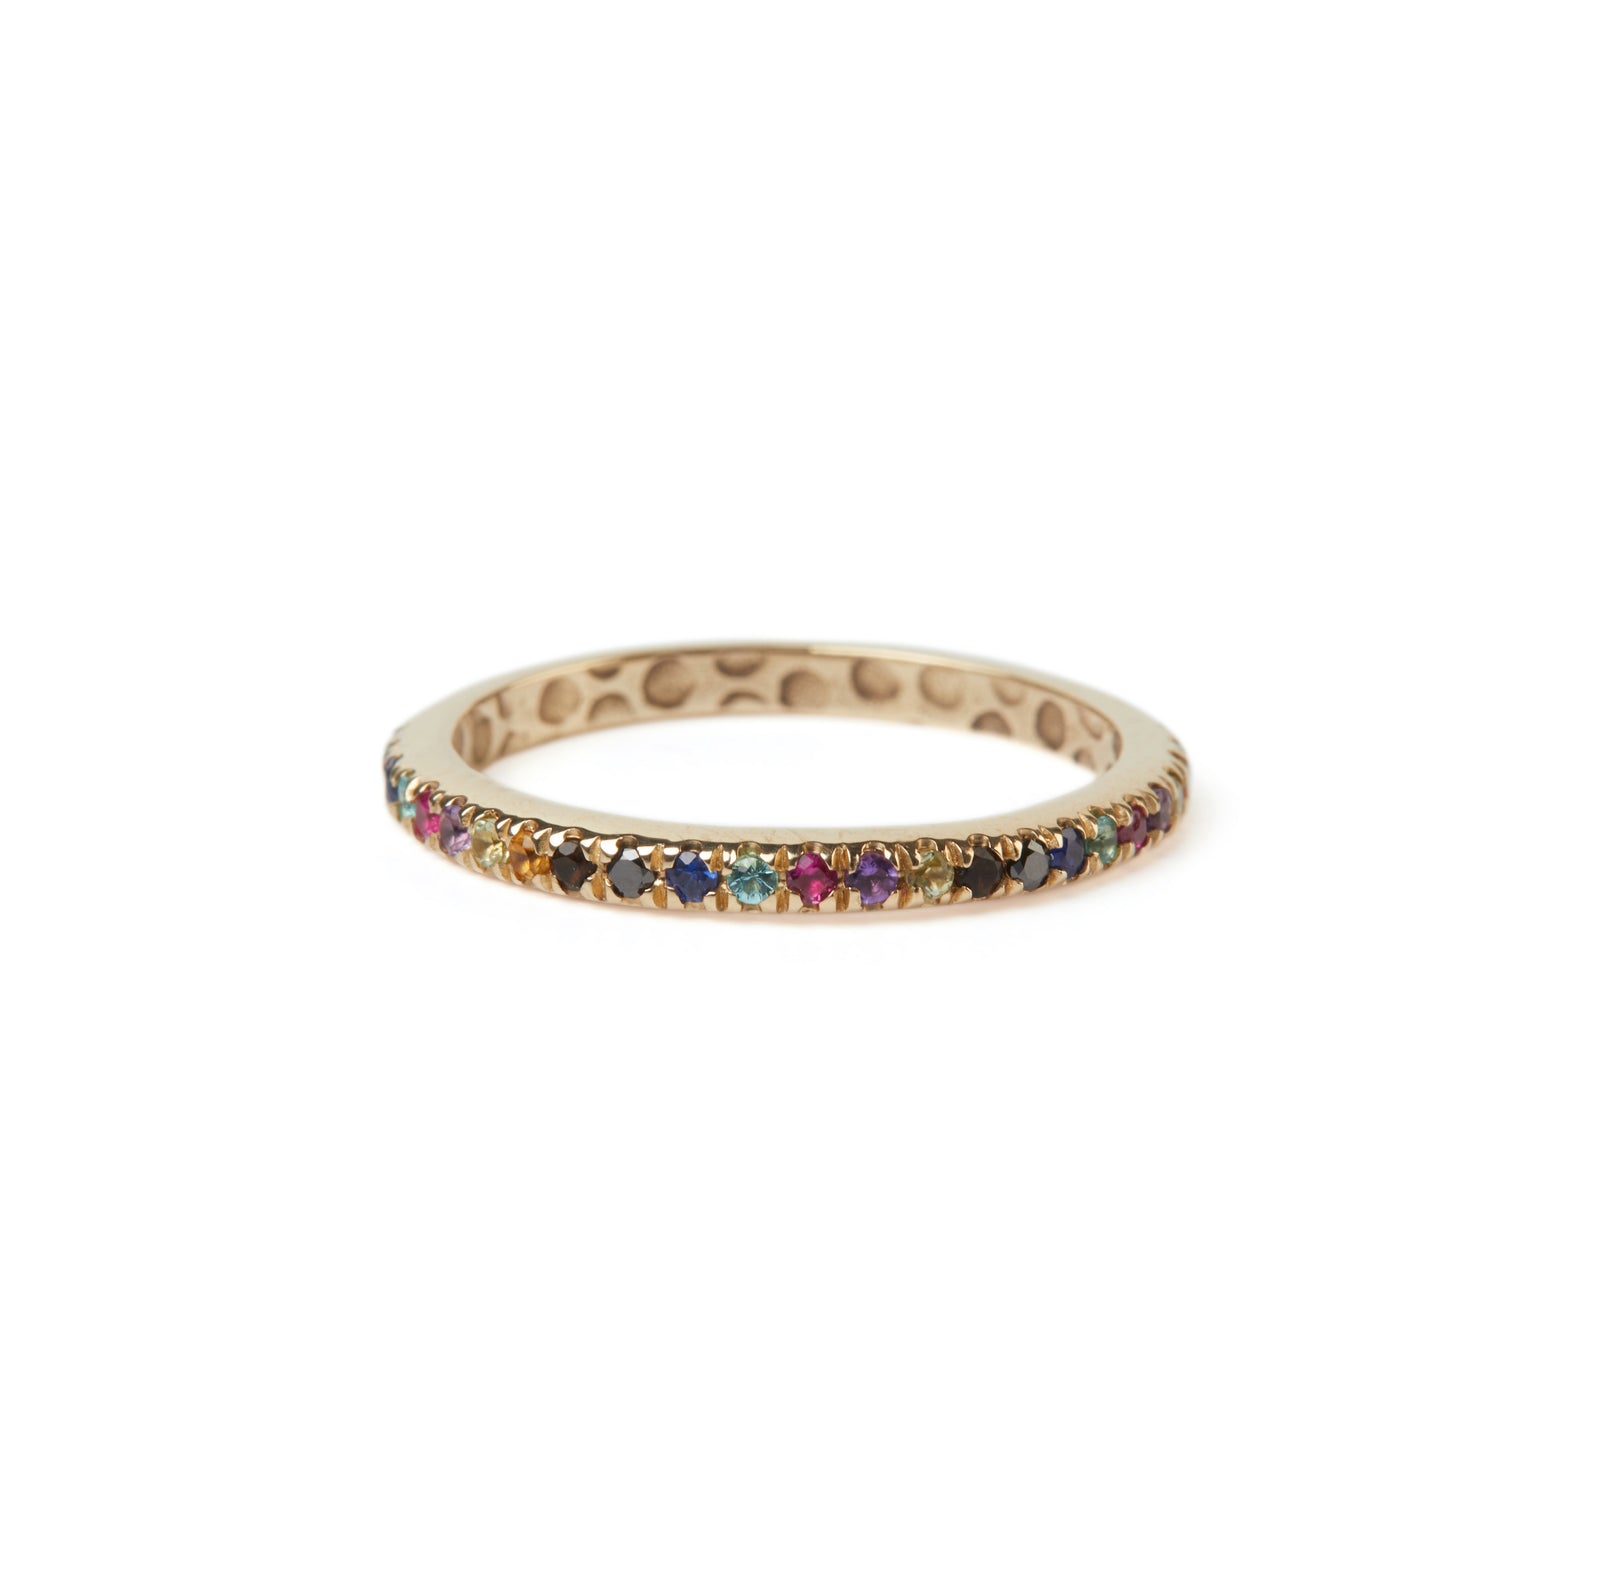 'Mixed Feelings' Faceted Rainbow Eternity Band